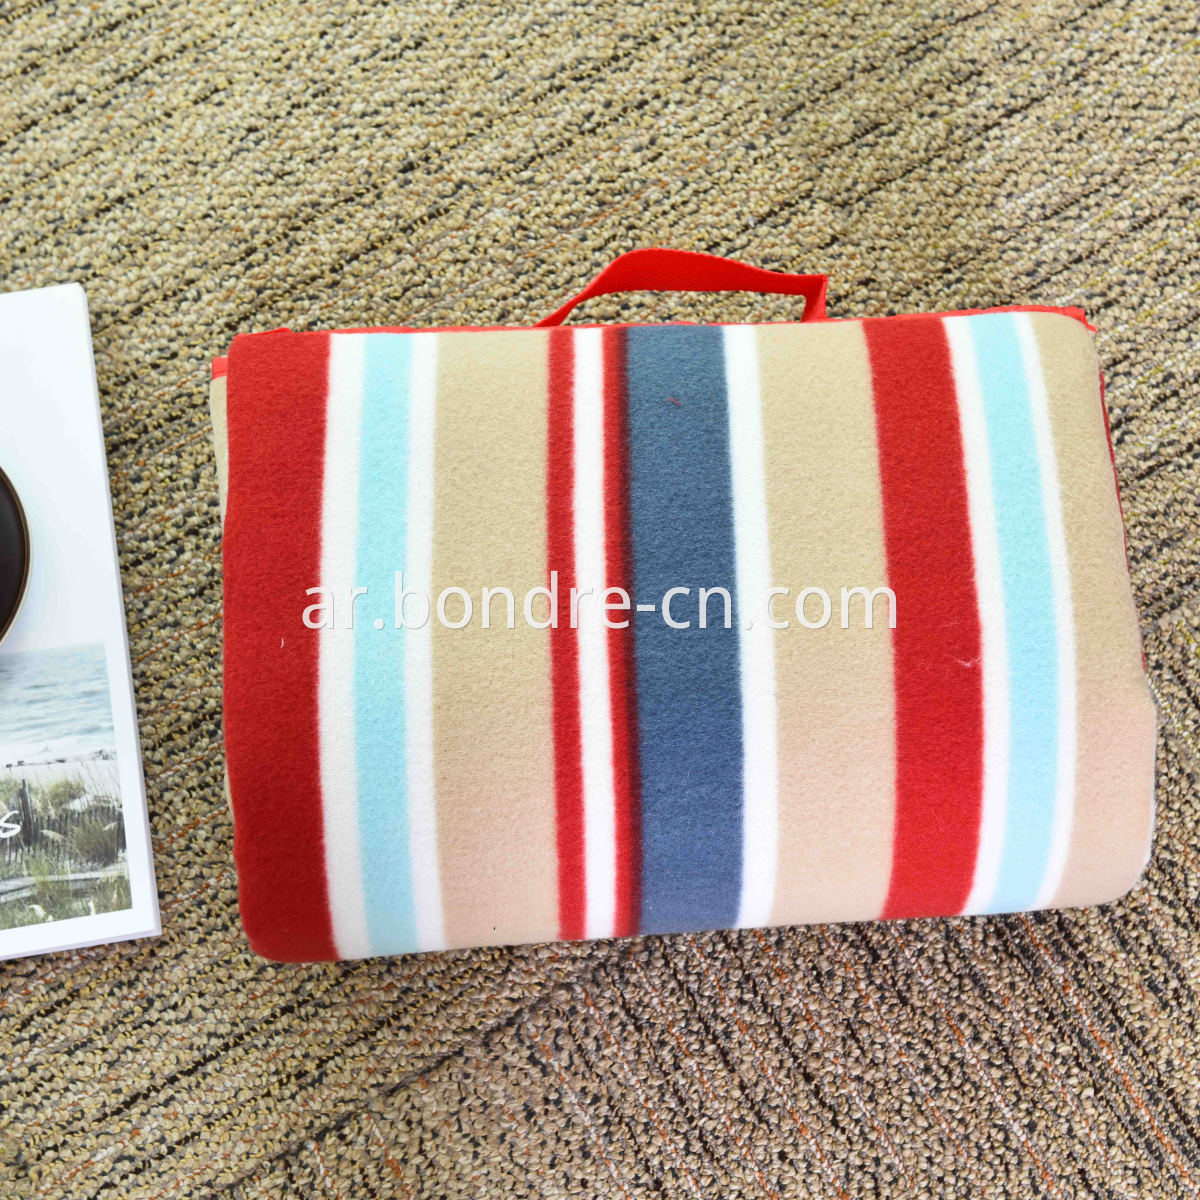 Picnic Mat With Foldable Design (1)